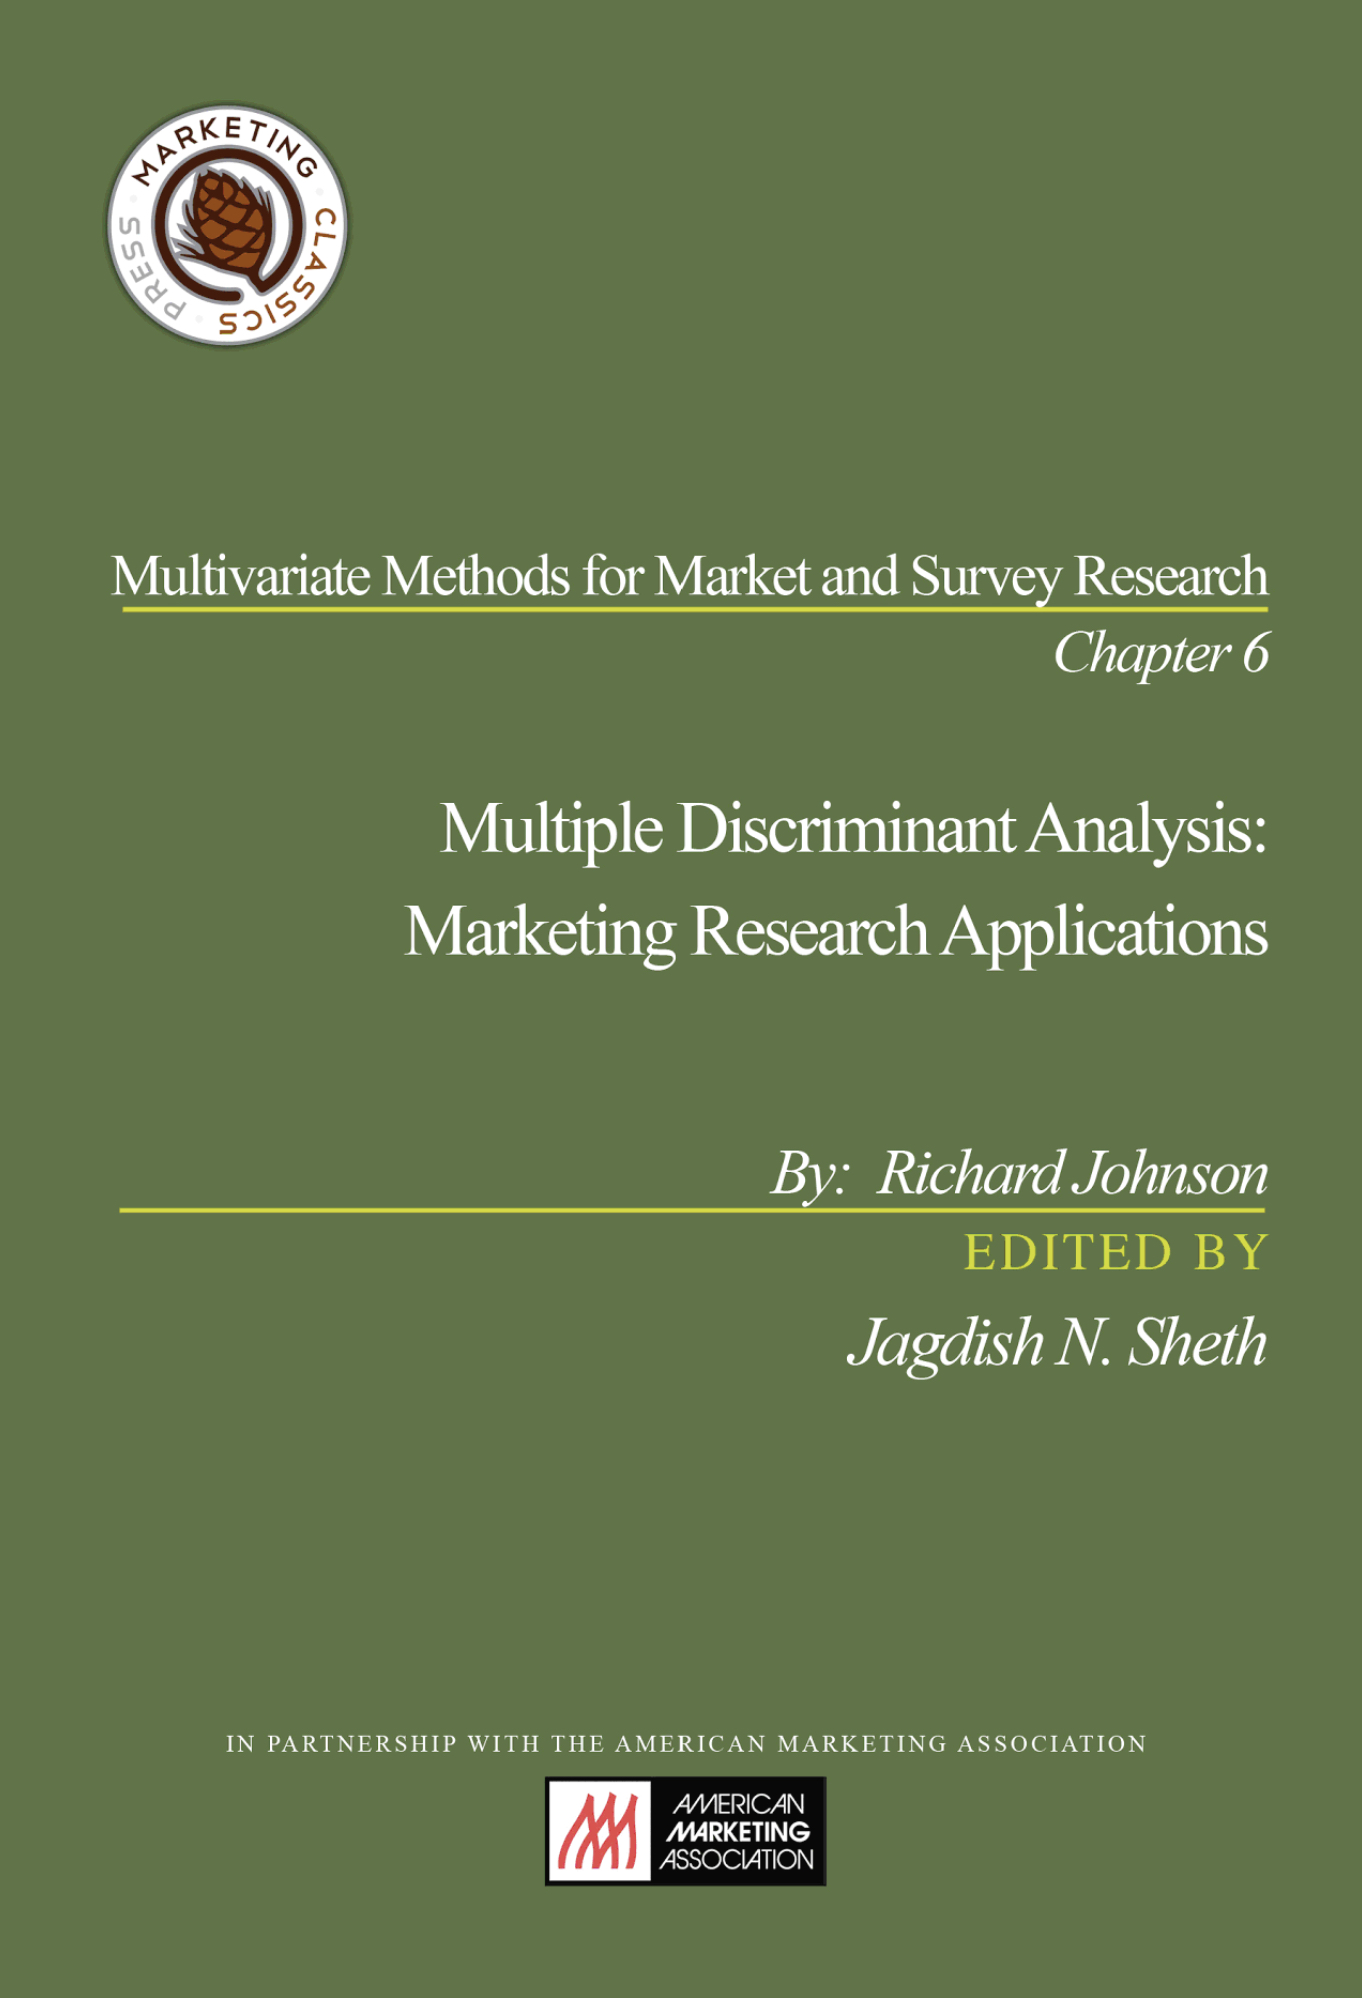 Multiple Discriminant Analysis: Marketing Research Applications